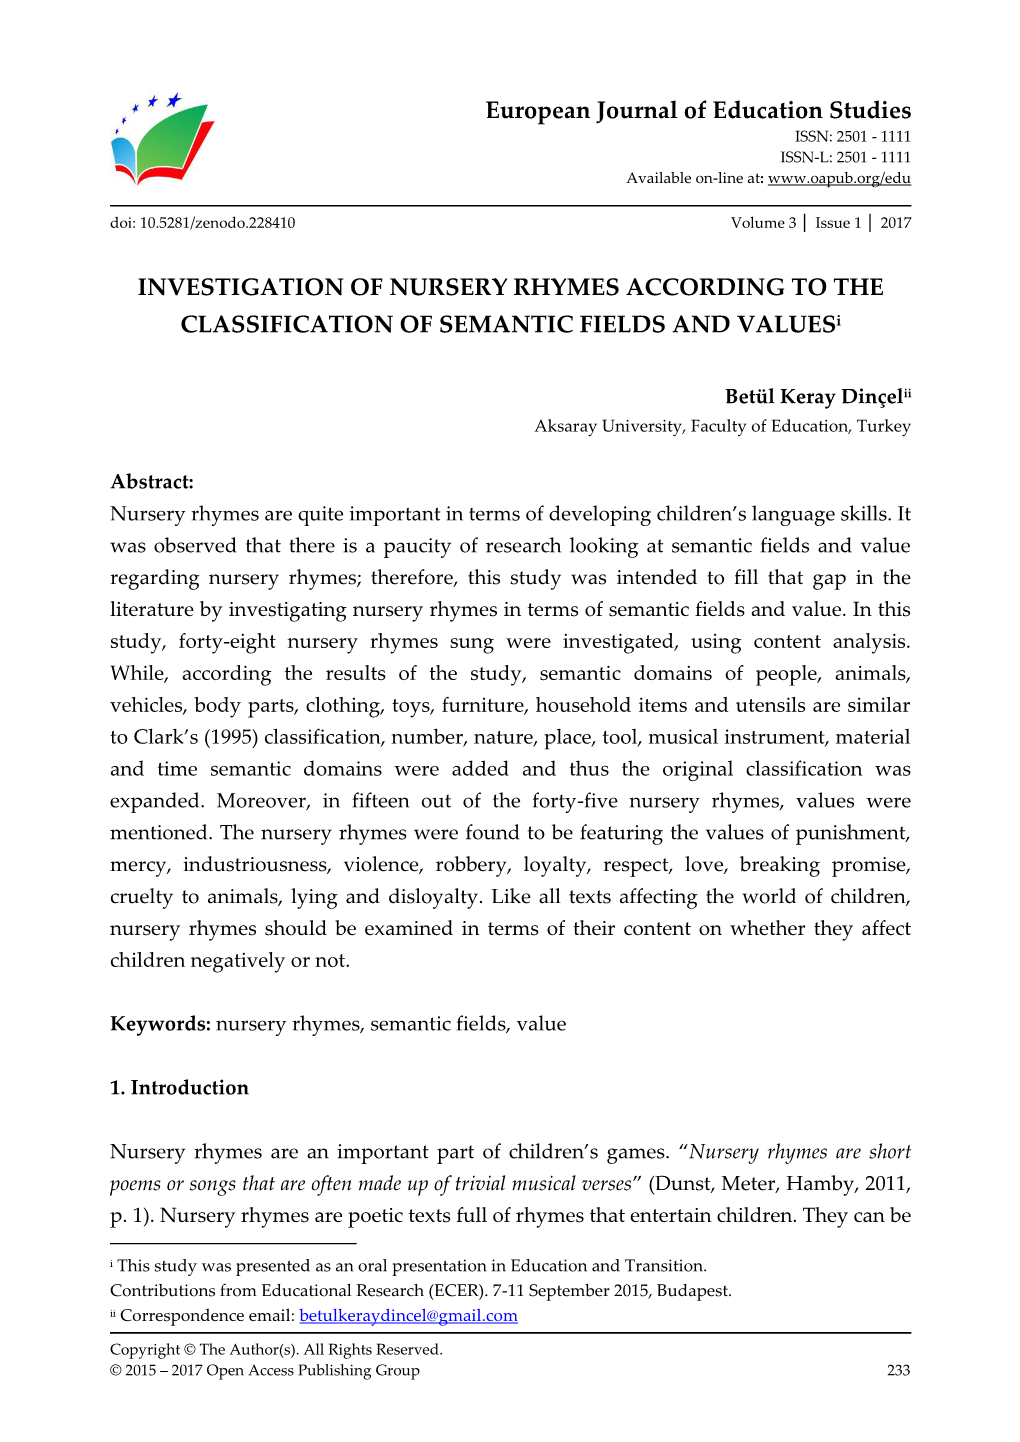 INVESTIGATION of NURSERY RHYMES ACCORDING to the CLASSIFICATION of SEMANTIC FIELDS and Valuesi